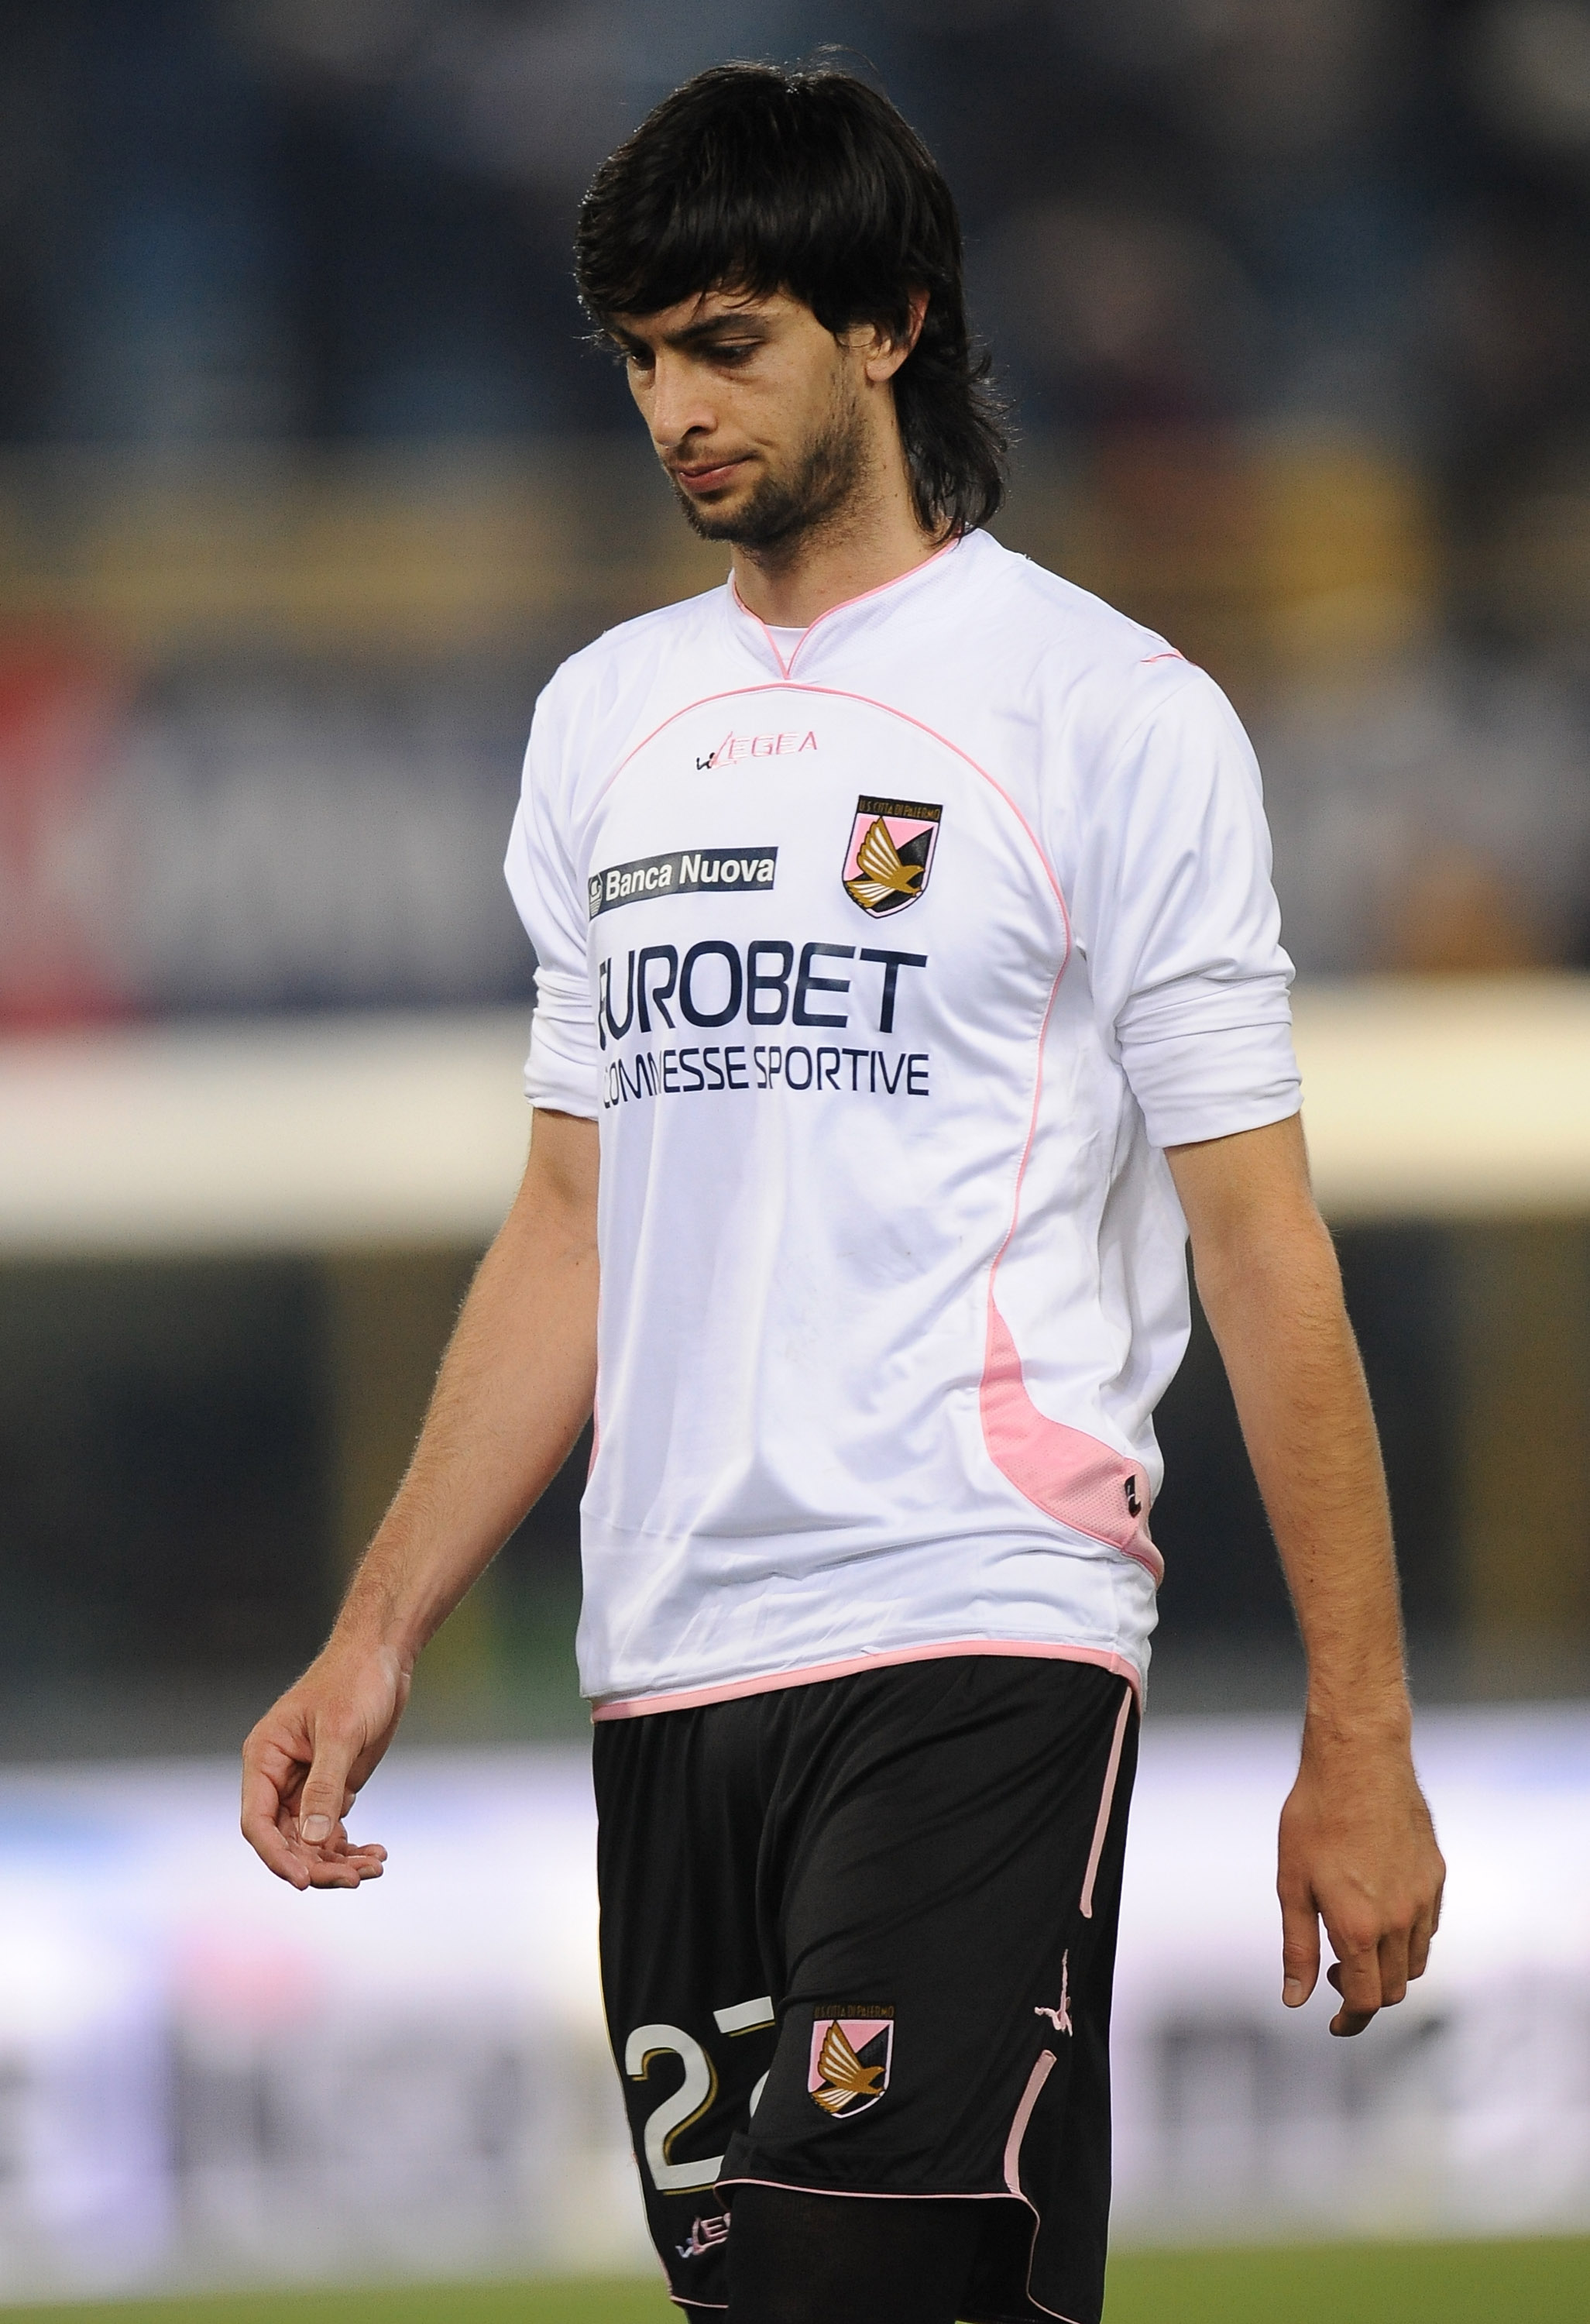 BOLOGNA, ITALY - FEBRUARY 19: Javier Pastore of Palermo looks dejected after losing the Serie A match between Bologna FC and US Citta di Palermo at Stadio Renato Dall'Ara on February 19, 2011 in Bologna, Italy.  (Photo by Tullio M. Puglia/Getty Images)